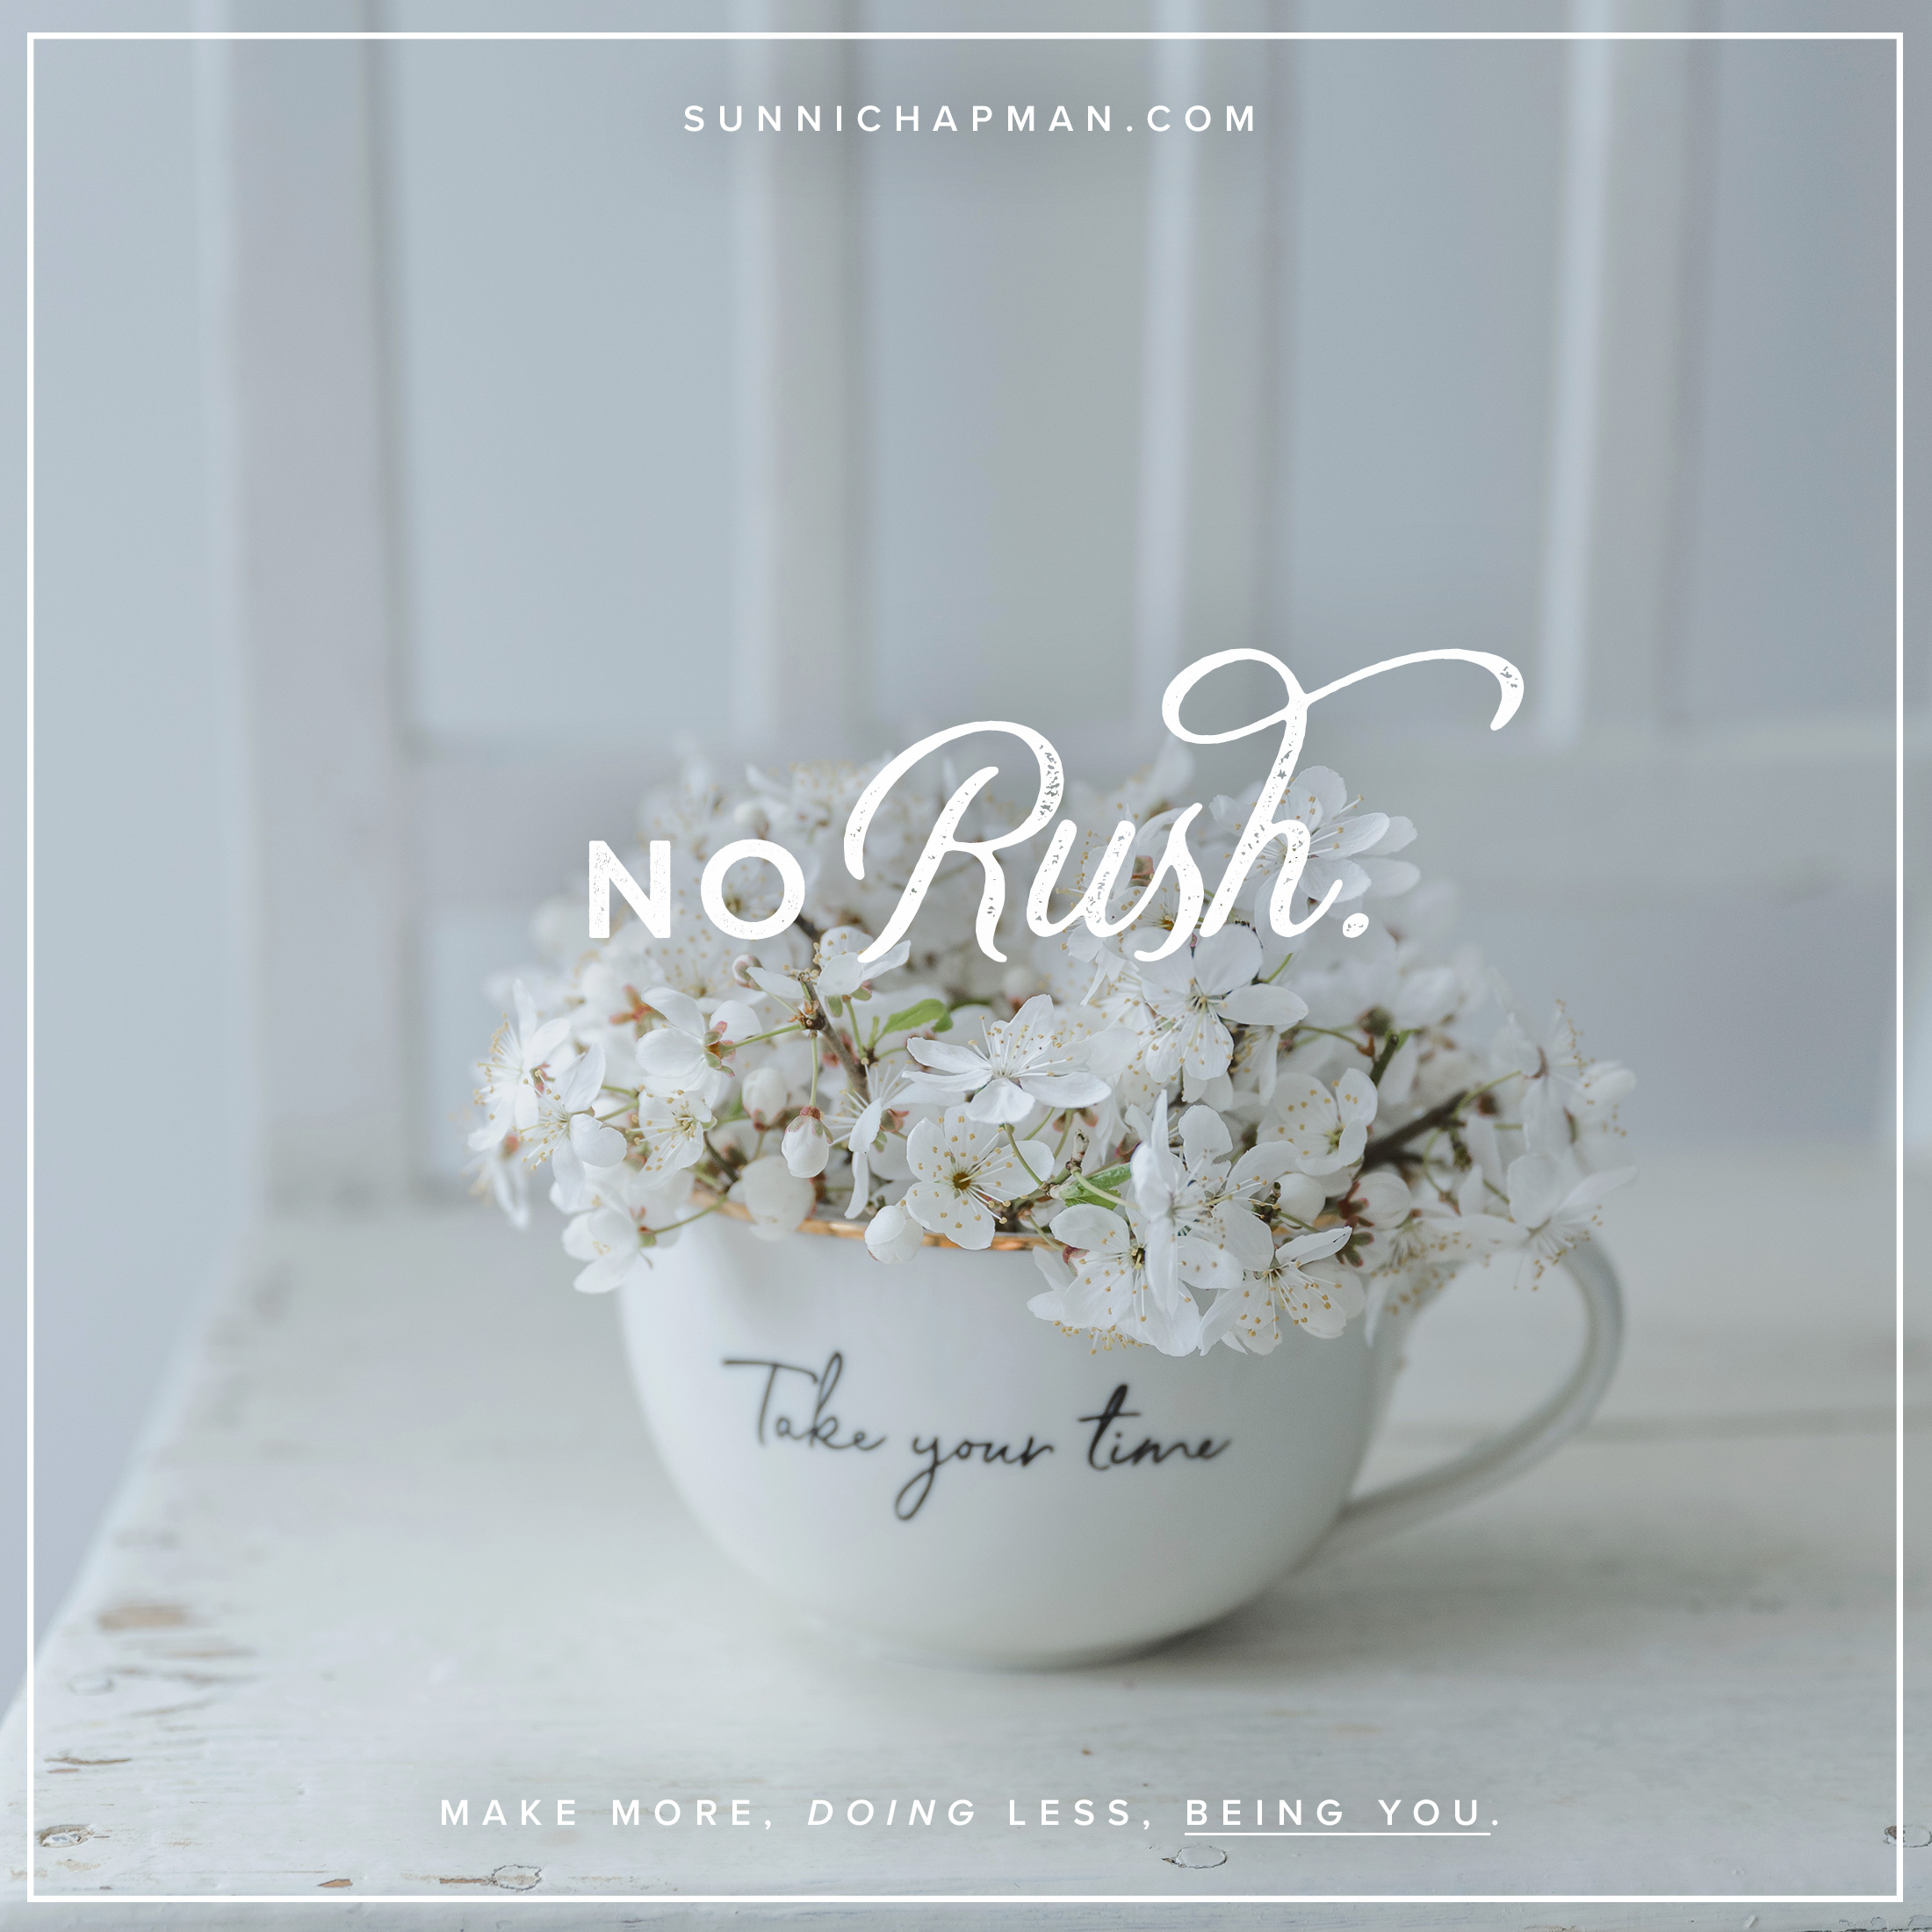 White flower in the tea cup with text "Take your Time" (on the cup) and image text is: No Rush